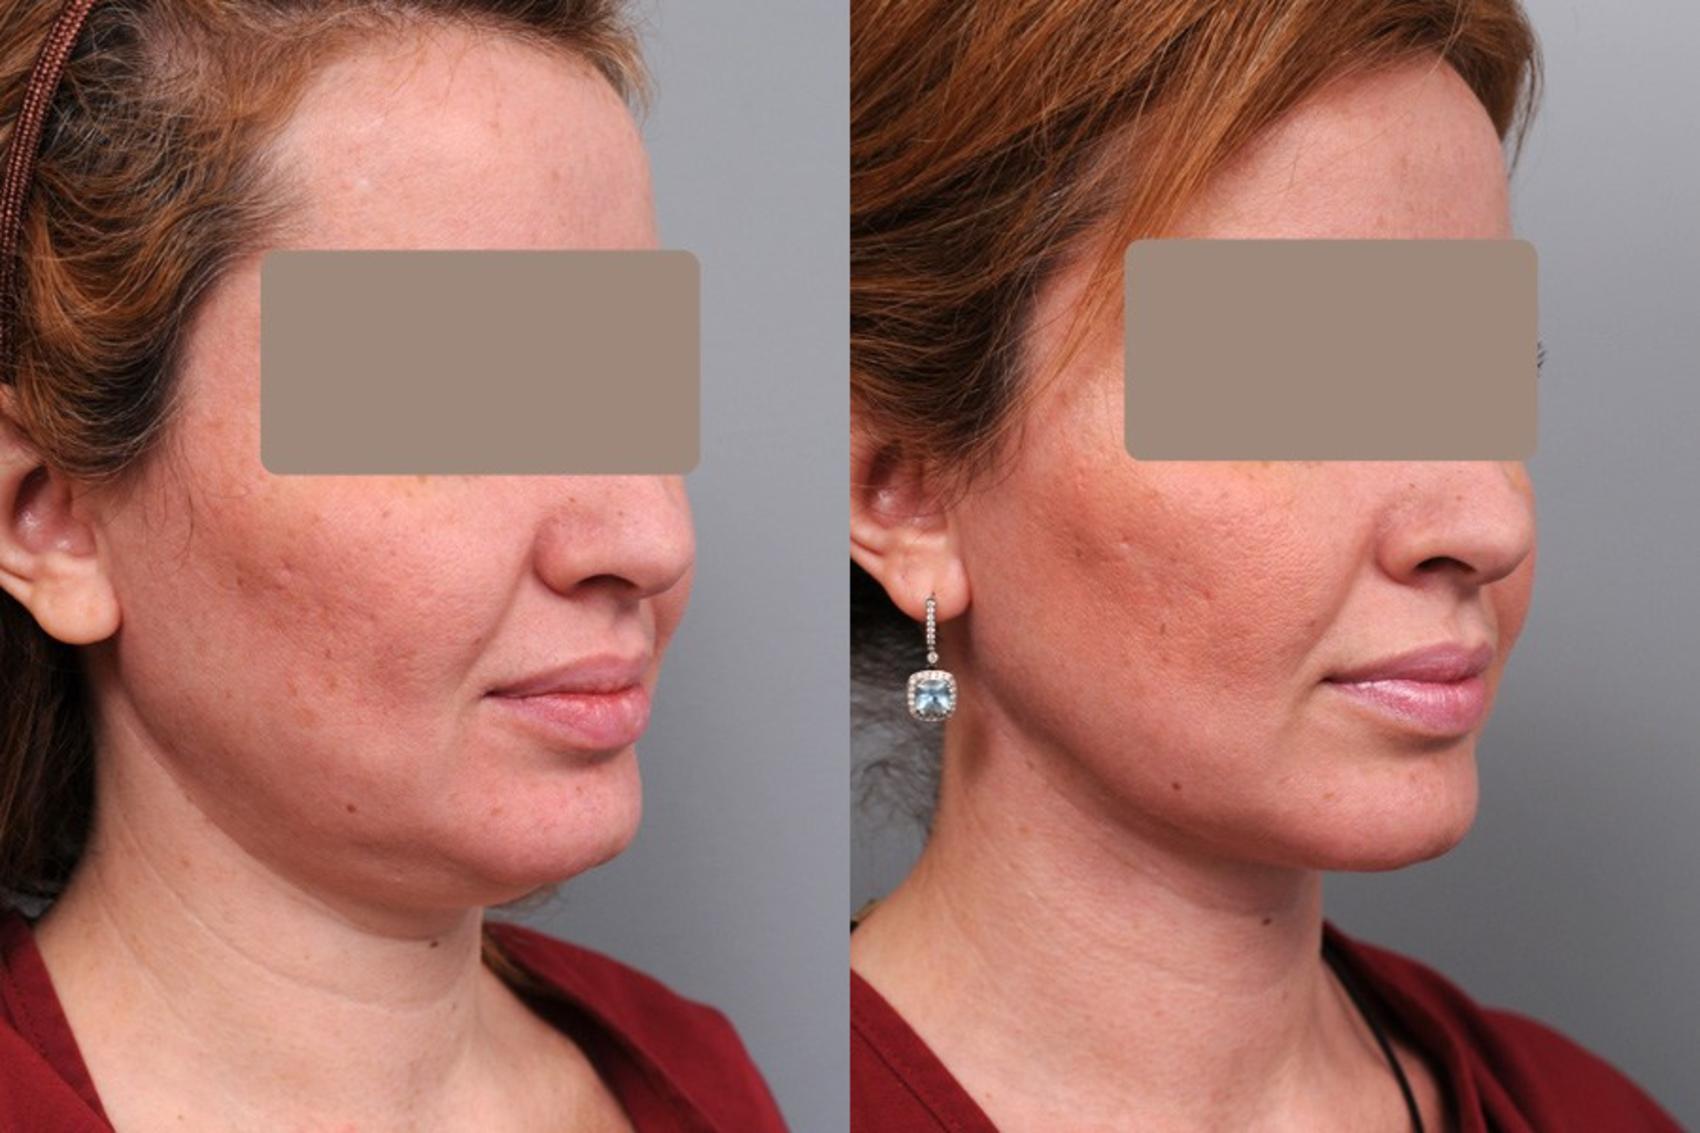 Smartlipo Liposuction Before After Photos Patient Nyc Dr